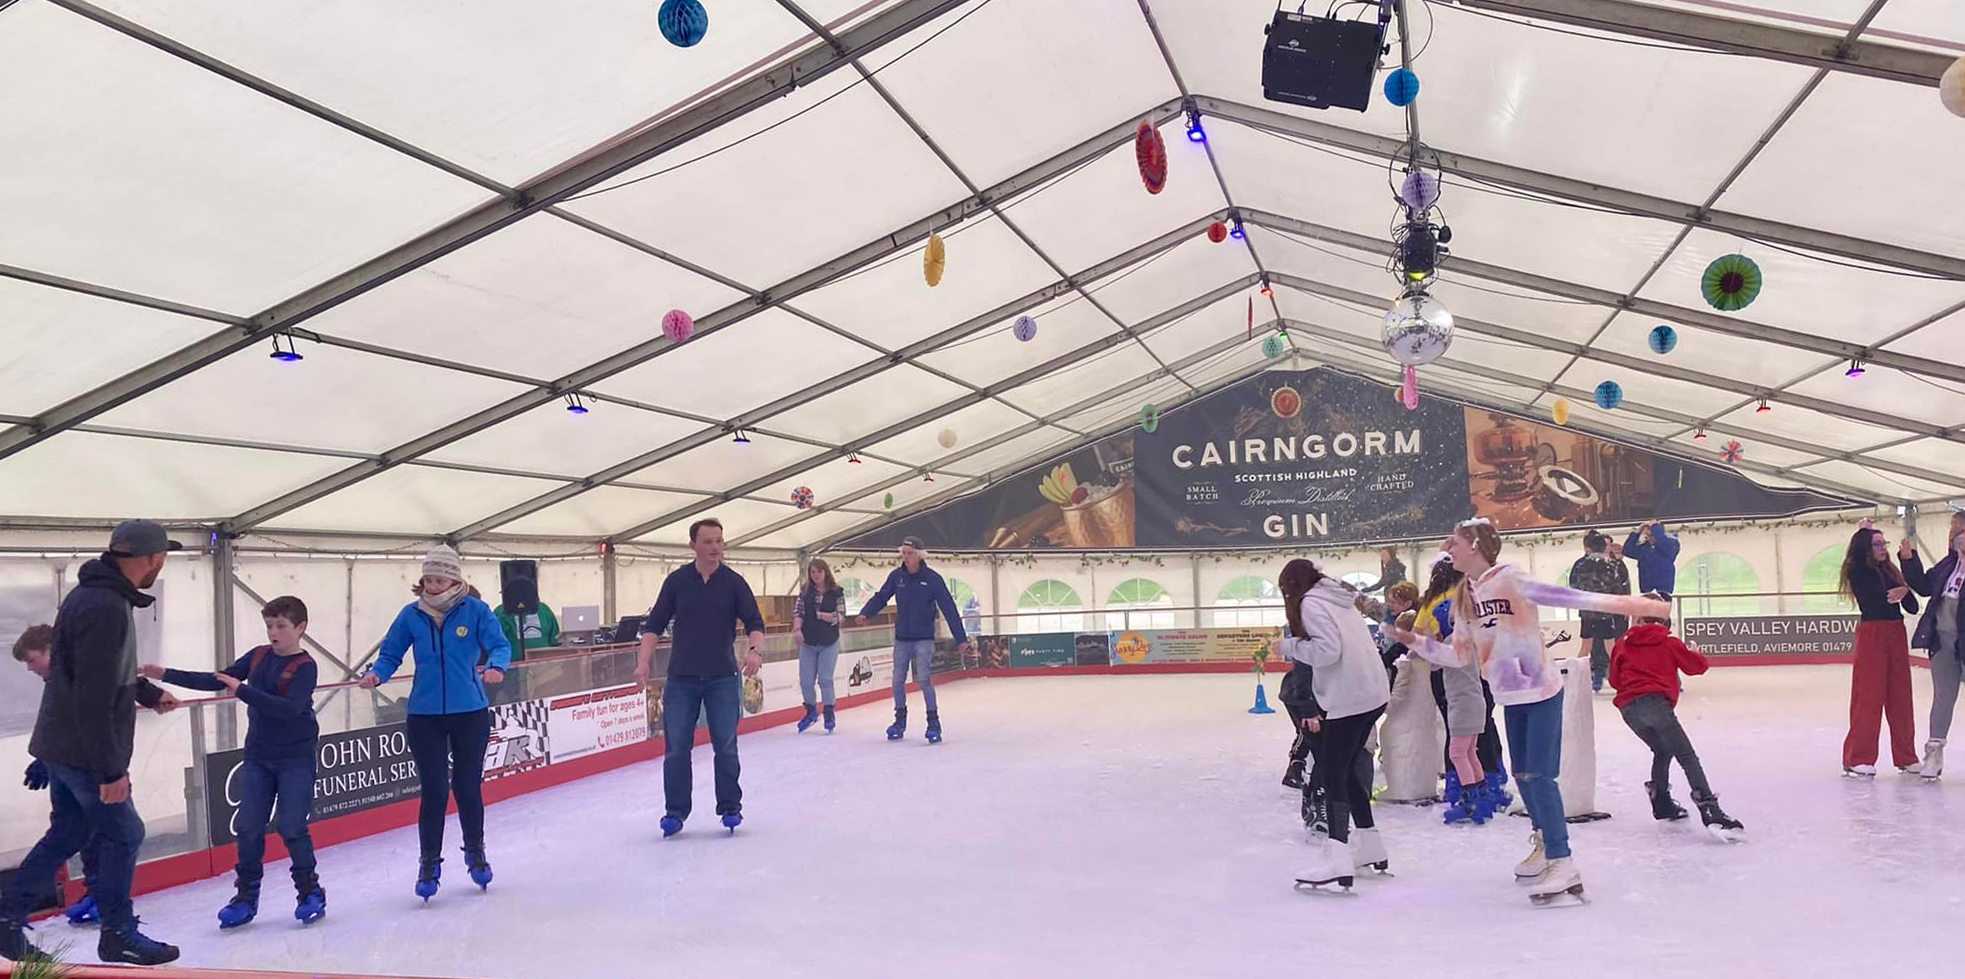 Kids and families skate at Aviemore ice rink